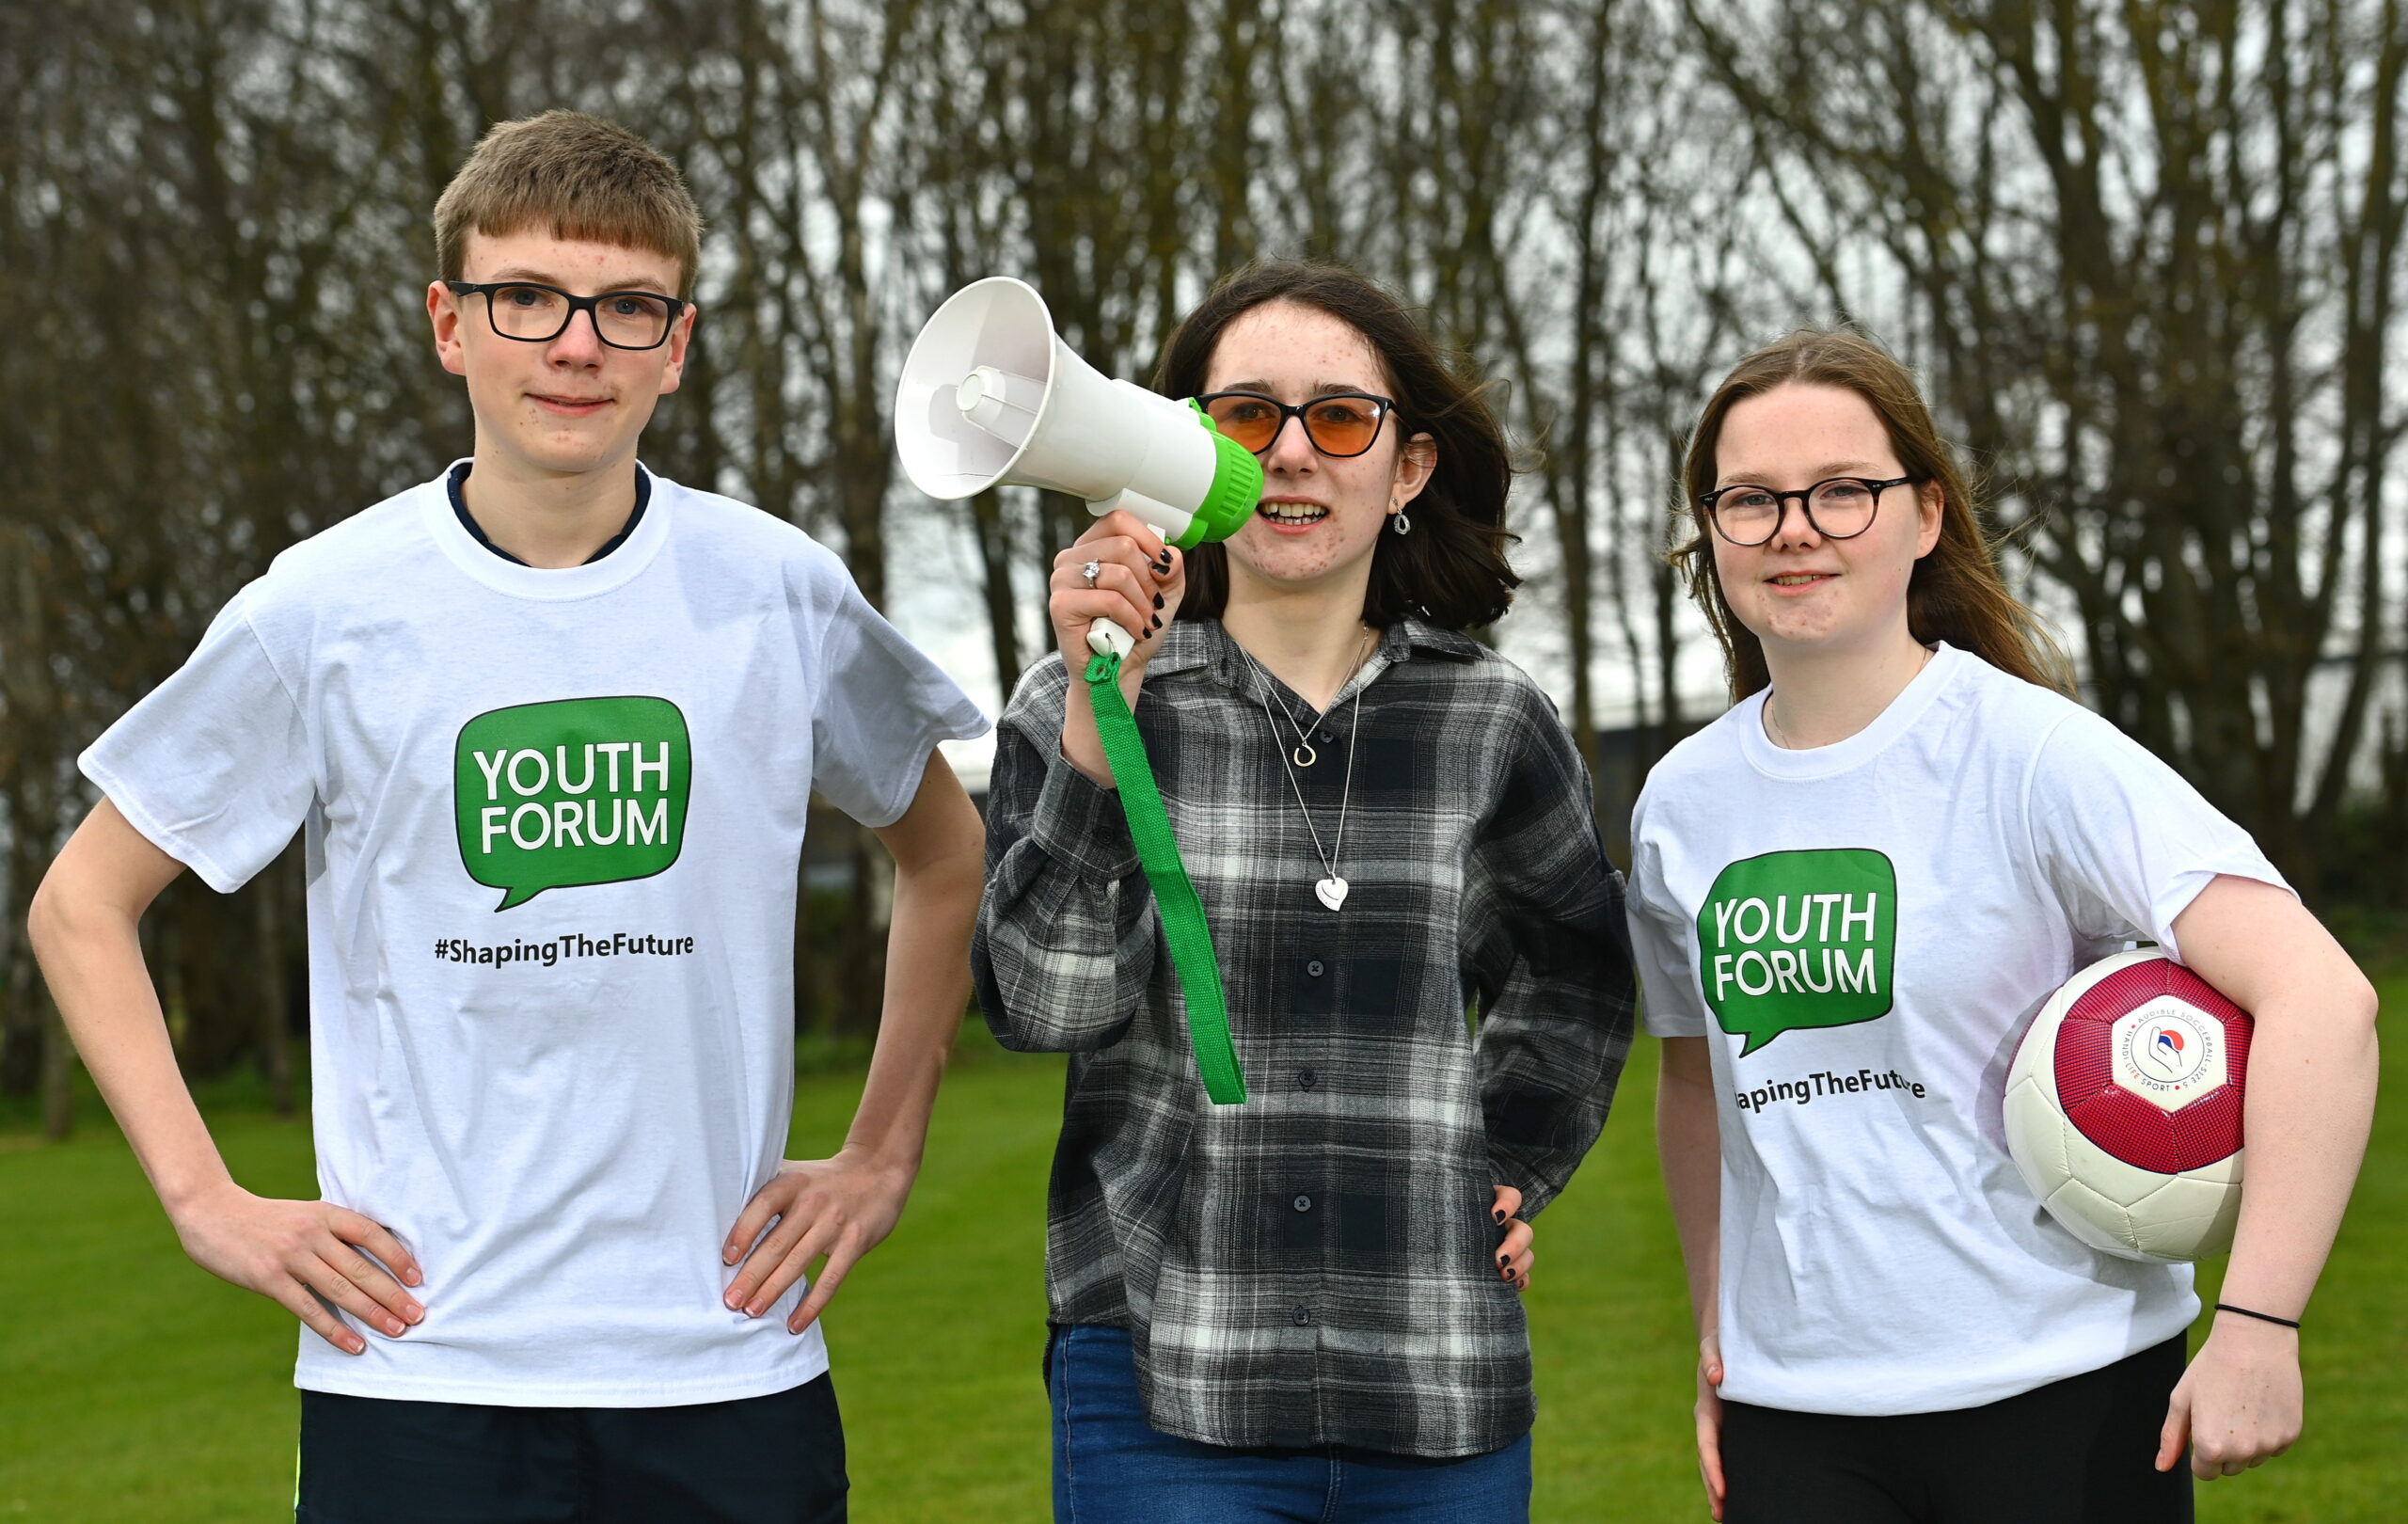 One boy and two girls stand together. The girls are holding a megaphone and a football while the boy stands with his hands on his hips. The boy and one girl are wearing white t-shirts with the Youth Forum logo on the front.